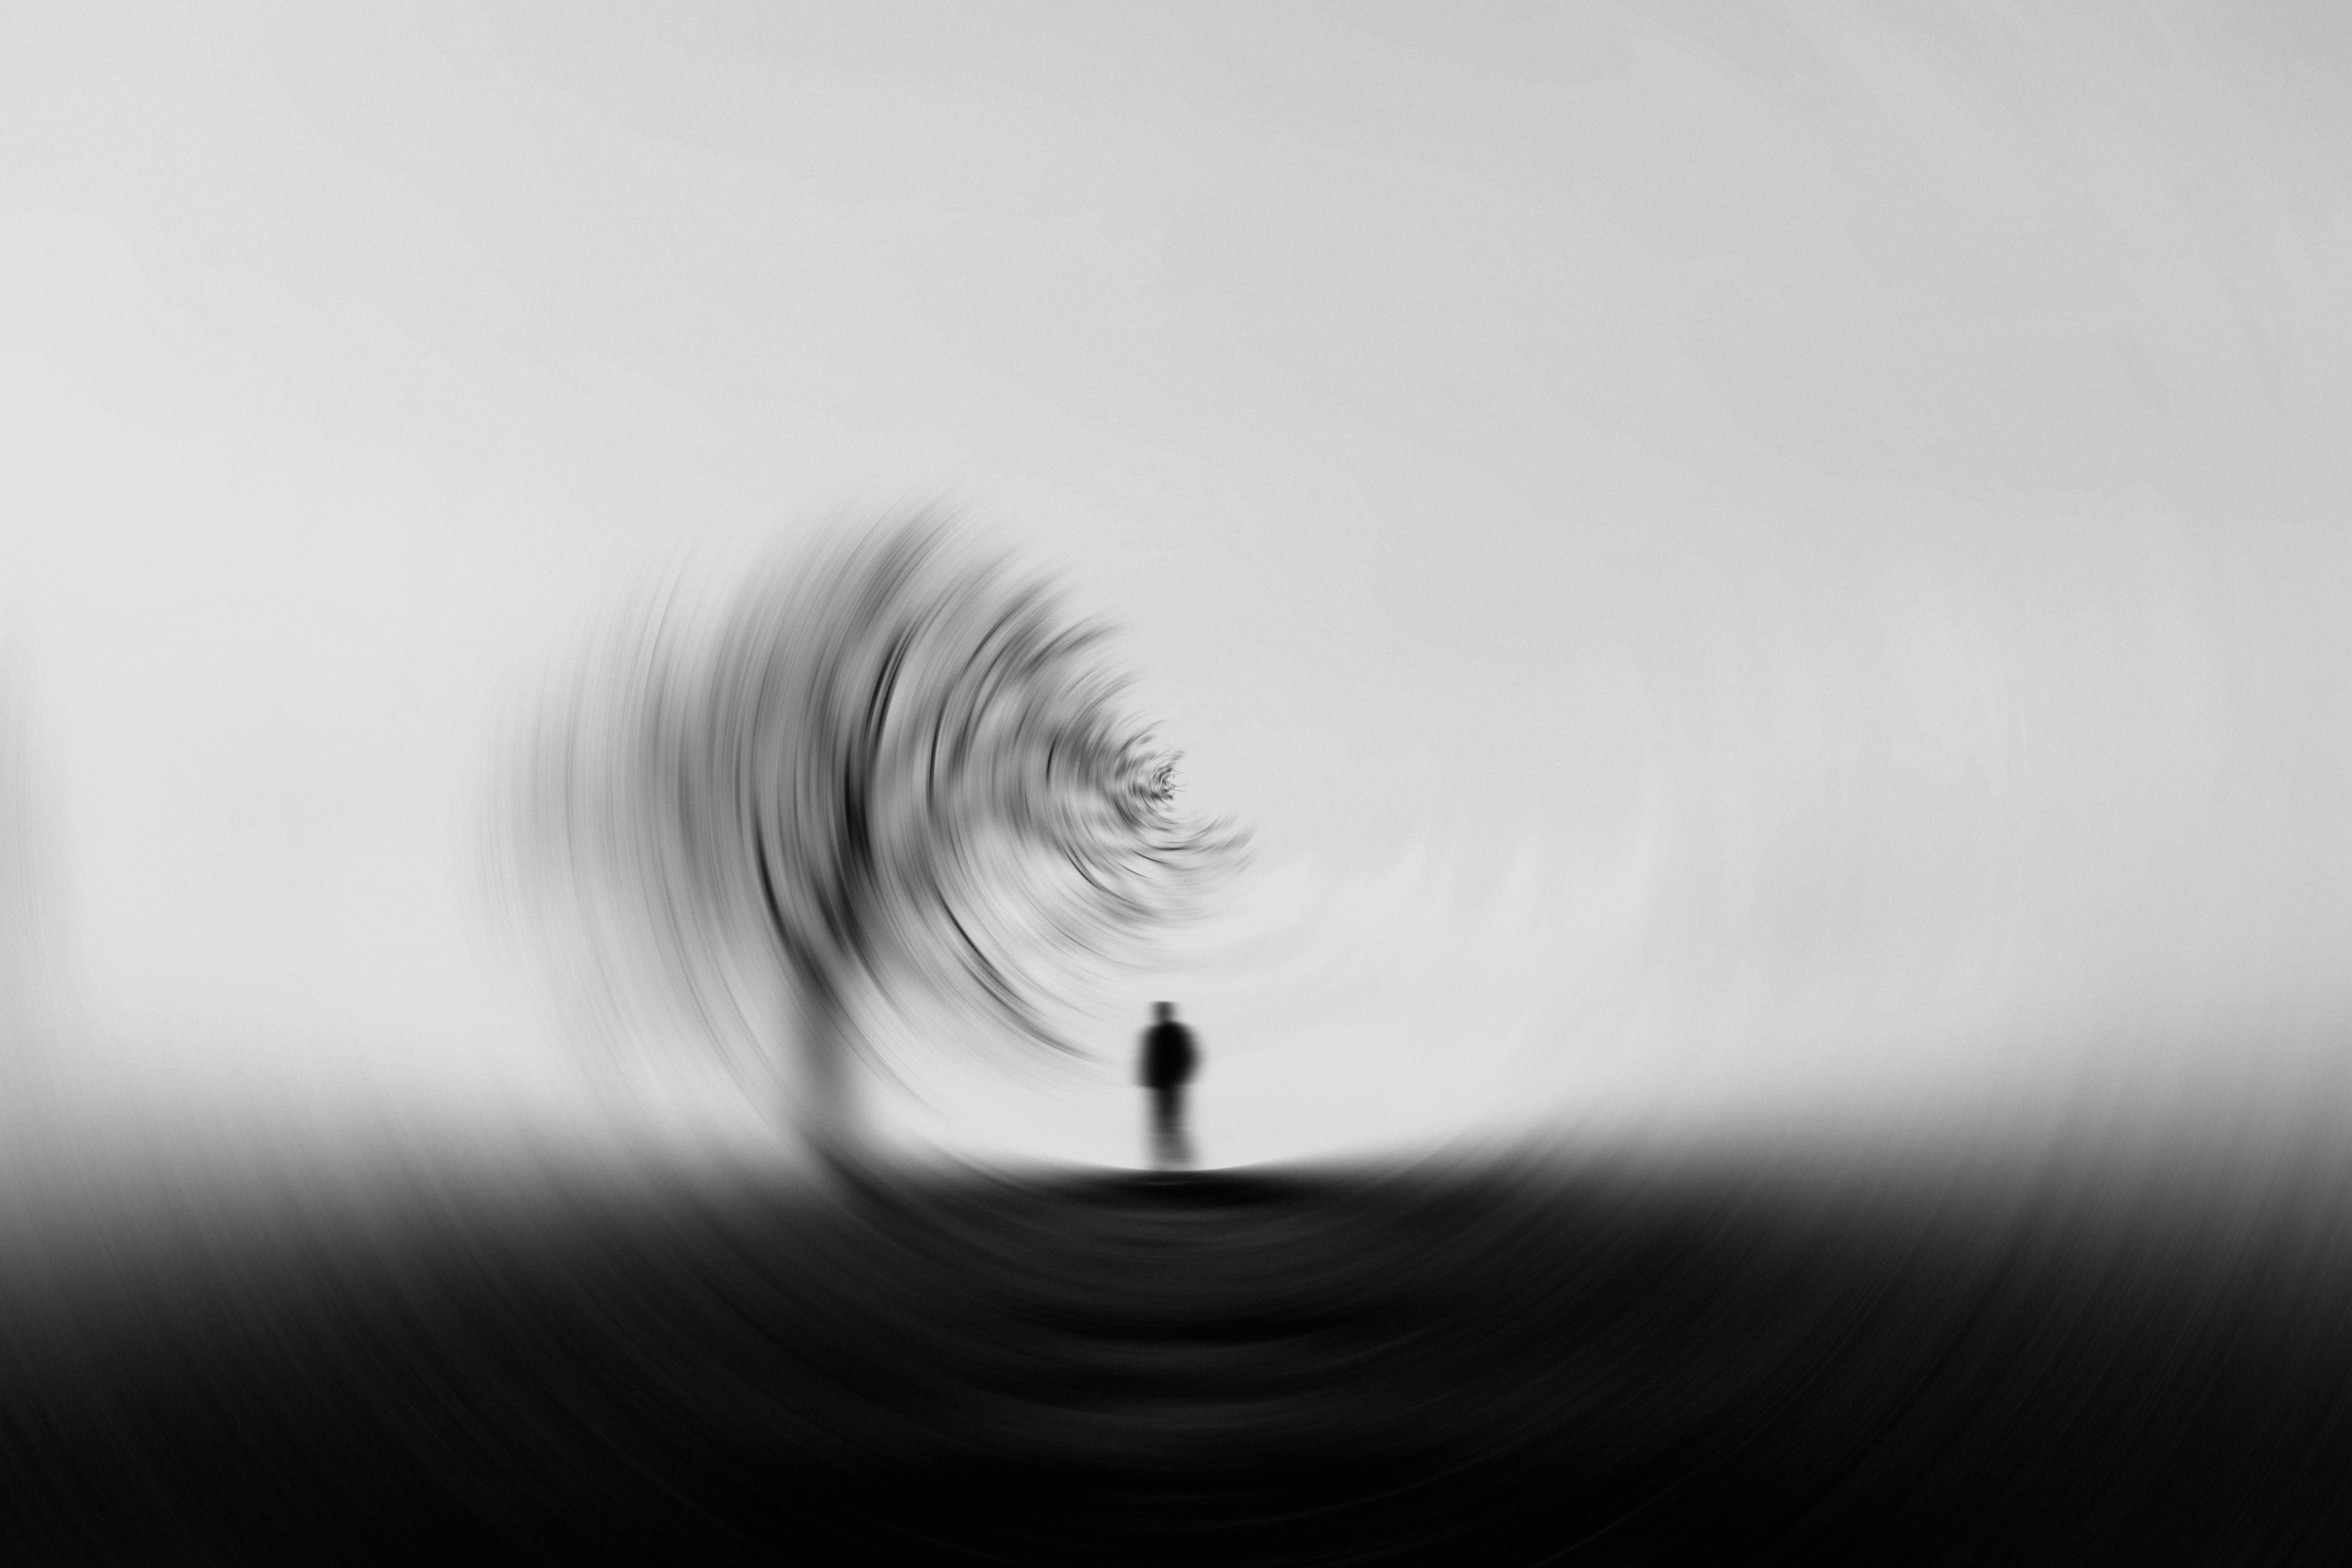 chb, silhouette, miscellanea, miscellaneous, wood, tree, blur, smooth, bw, effect mobile wallpaper